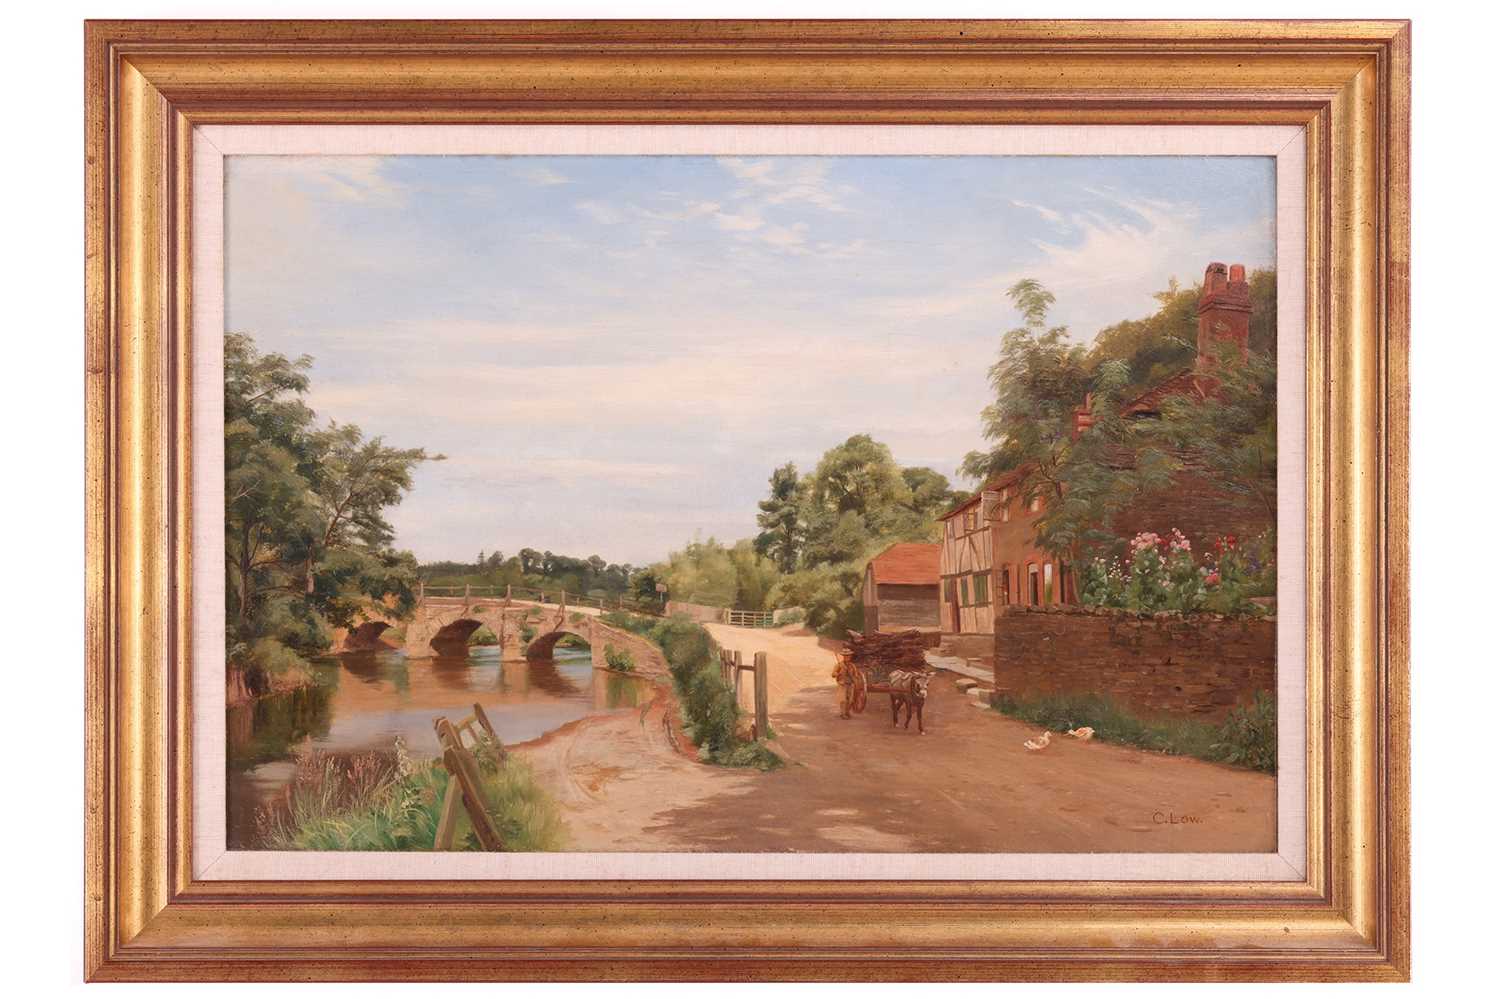 Charles Low (1840 - 1906), The Village Ford, Eashing, Surrey, signed, oil on canvas, 32.5 x 49 cm, f